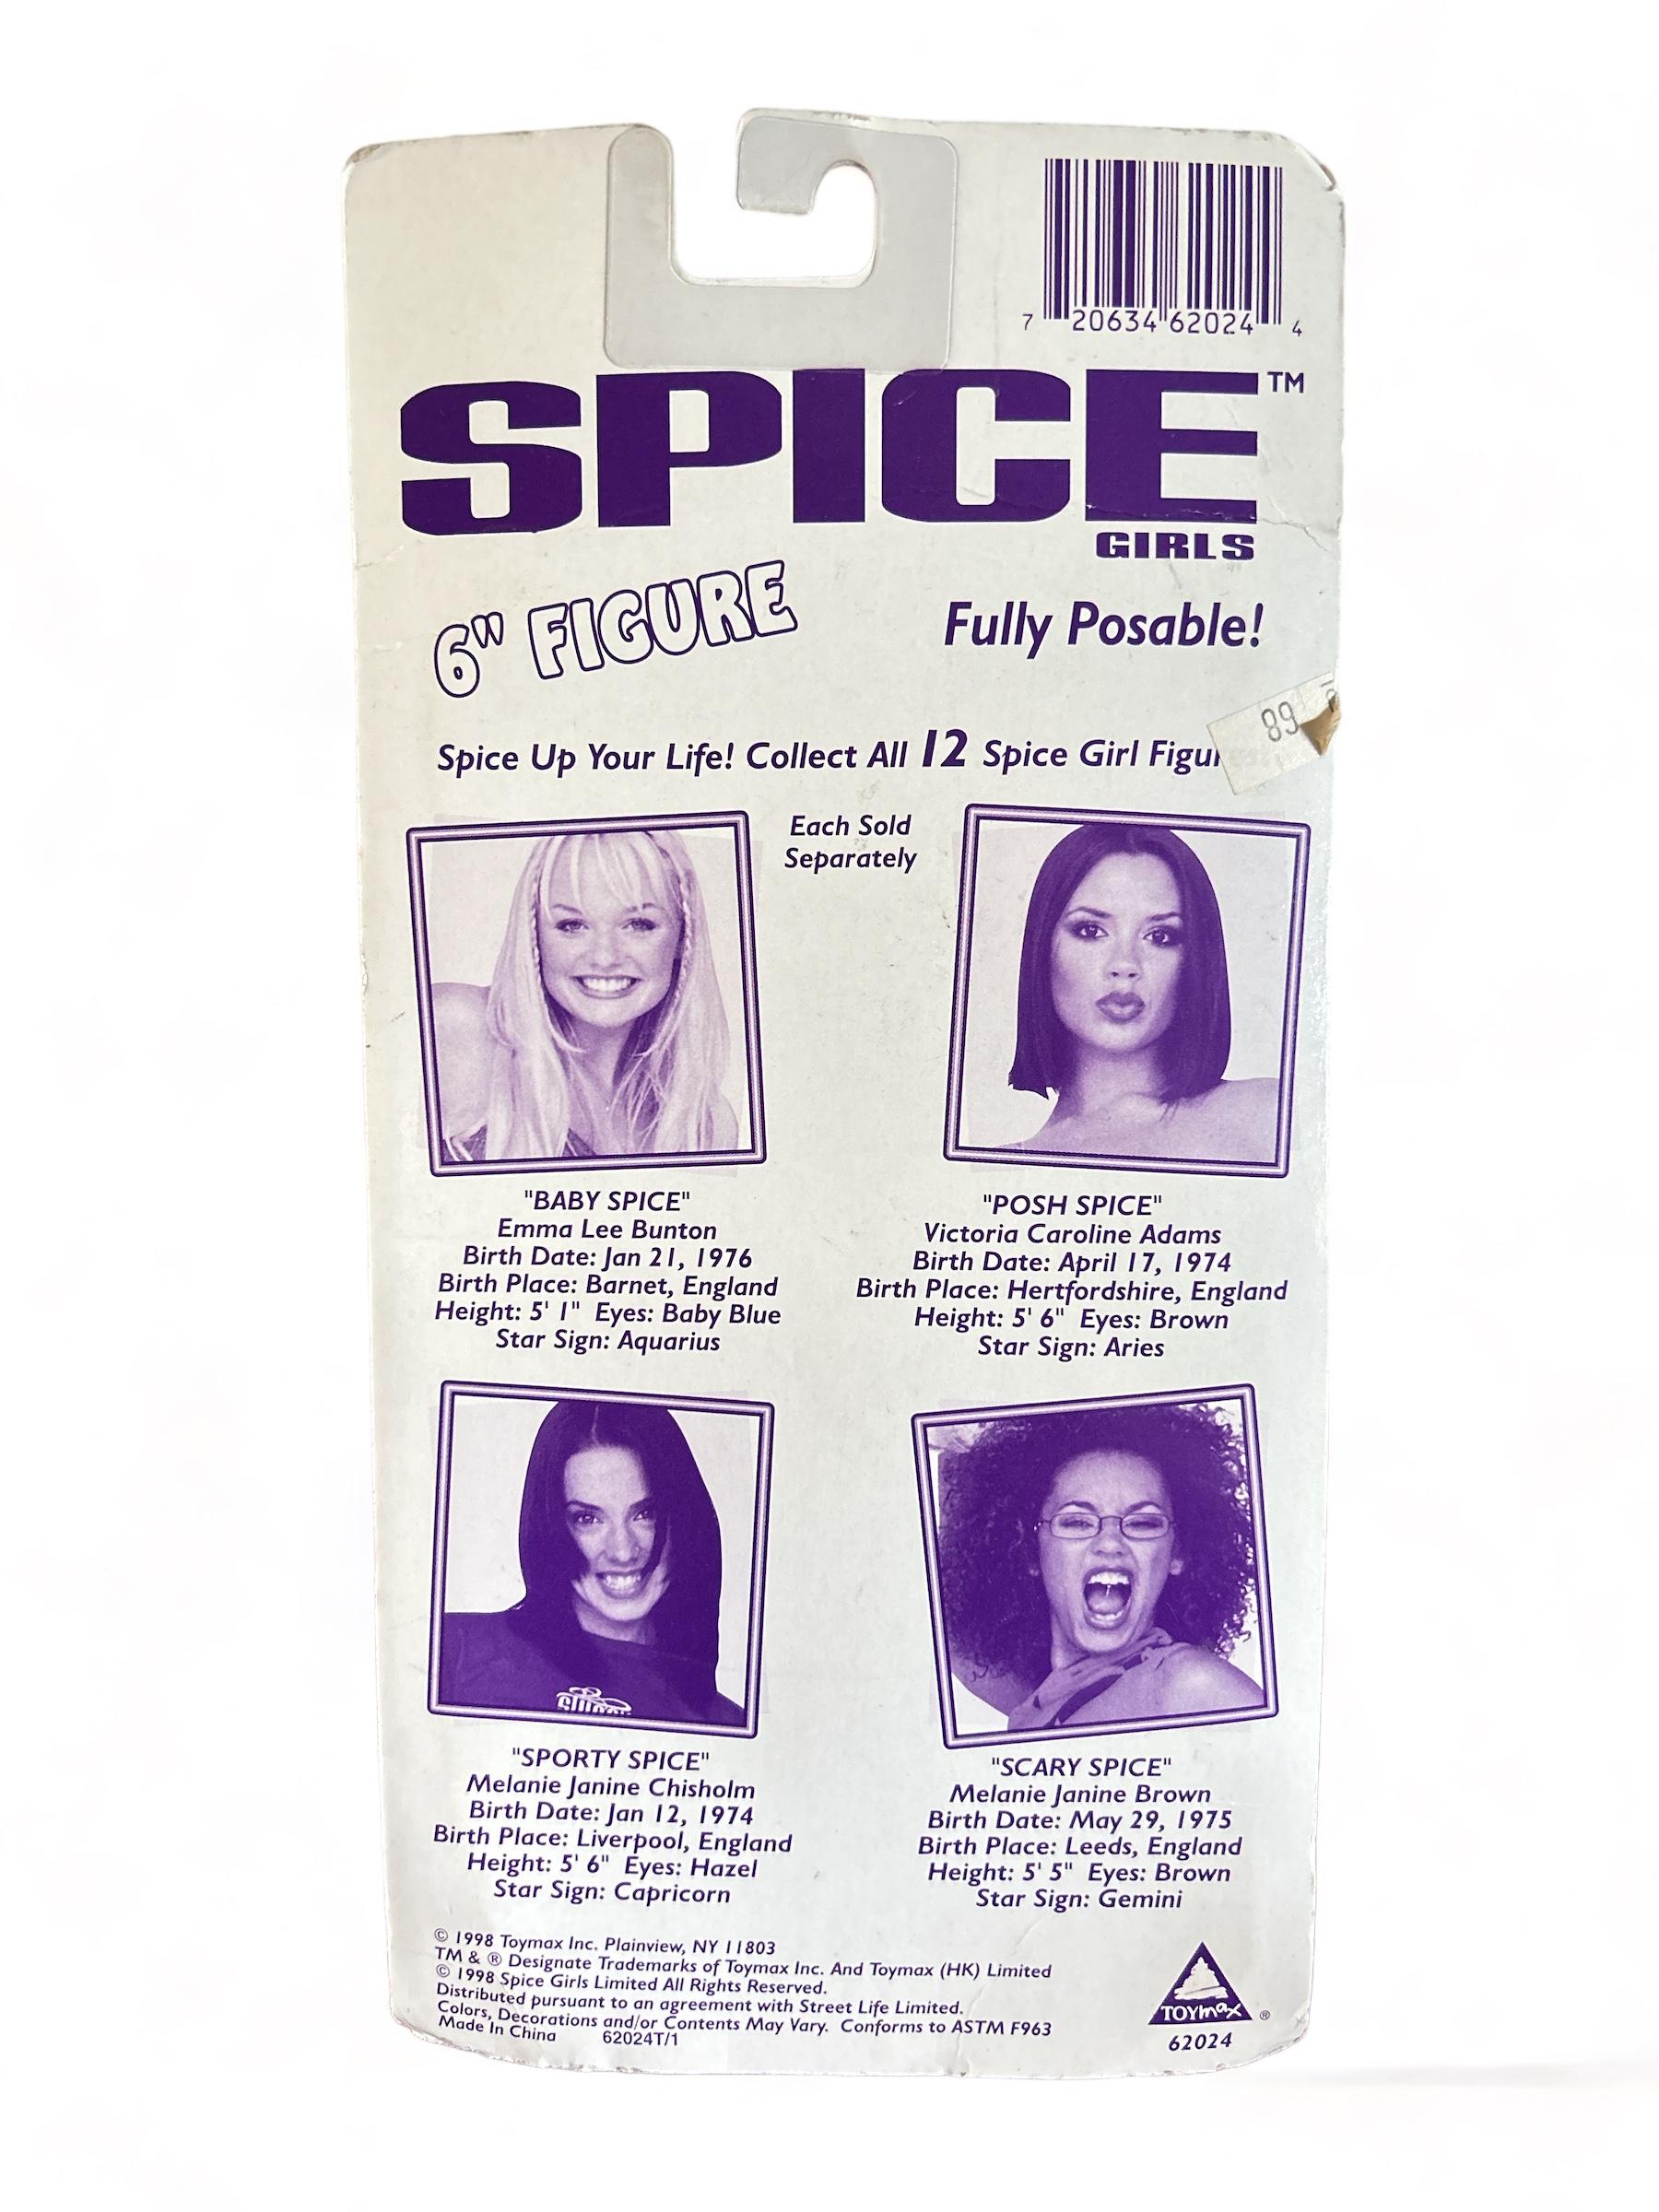 Spice Girls "Scary Spice" 6" posable action figure